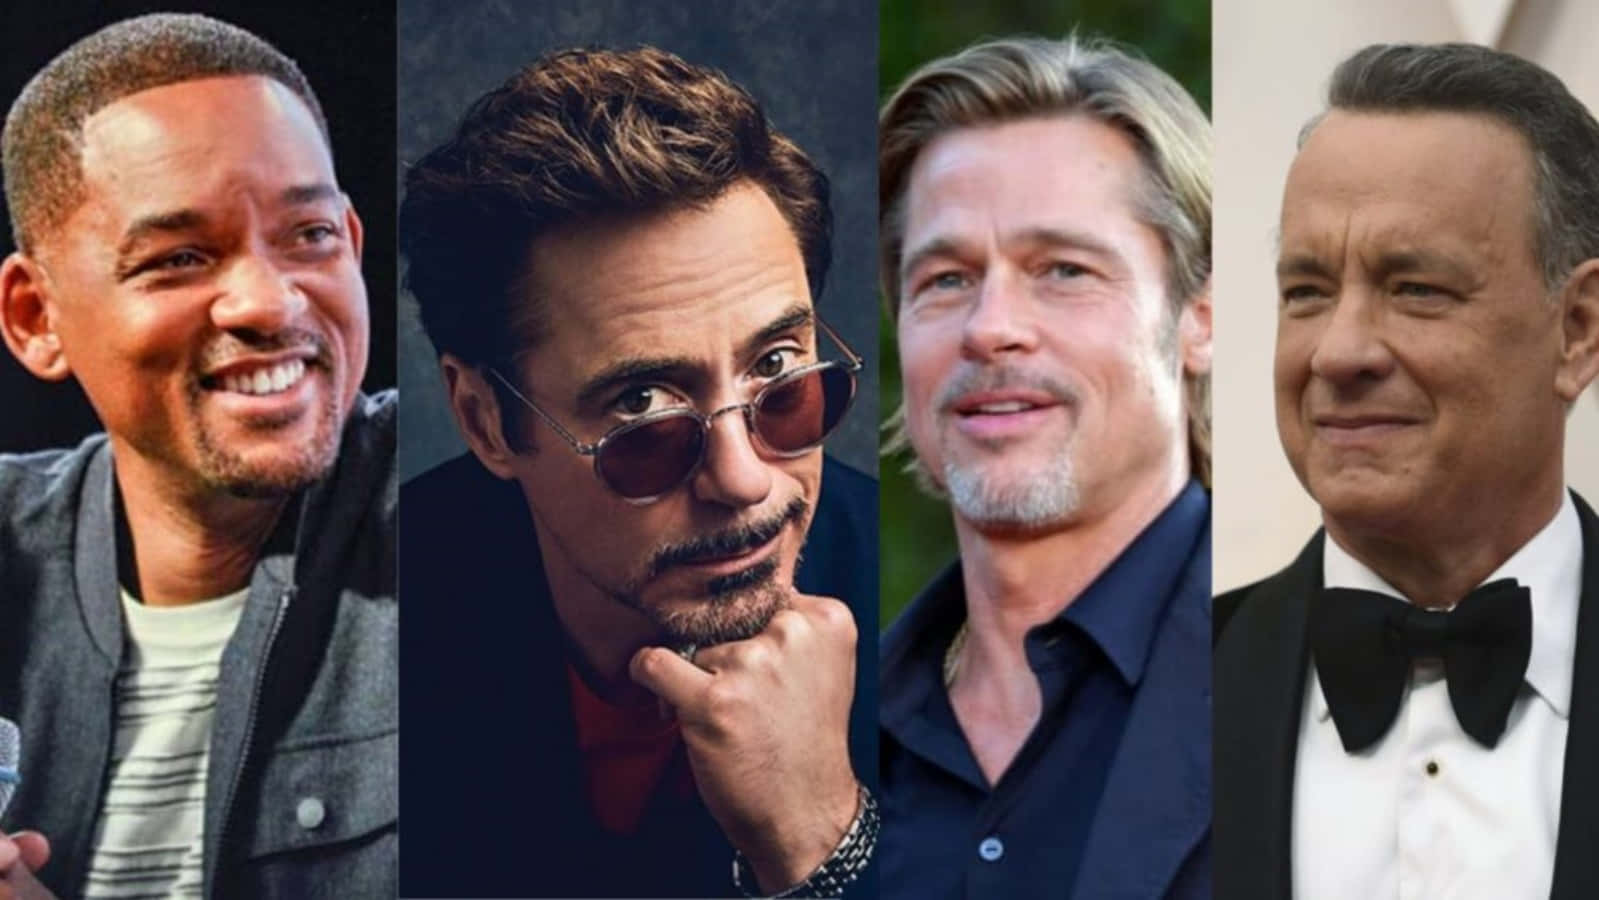 Hollywood movie stars Emily Blunt, Ryan Gosling and Chris Pine appreciated for their iconic roles.